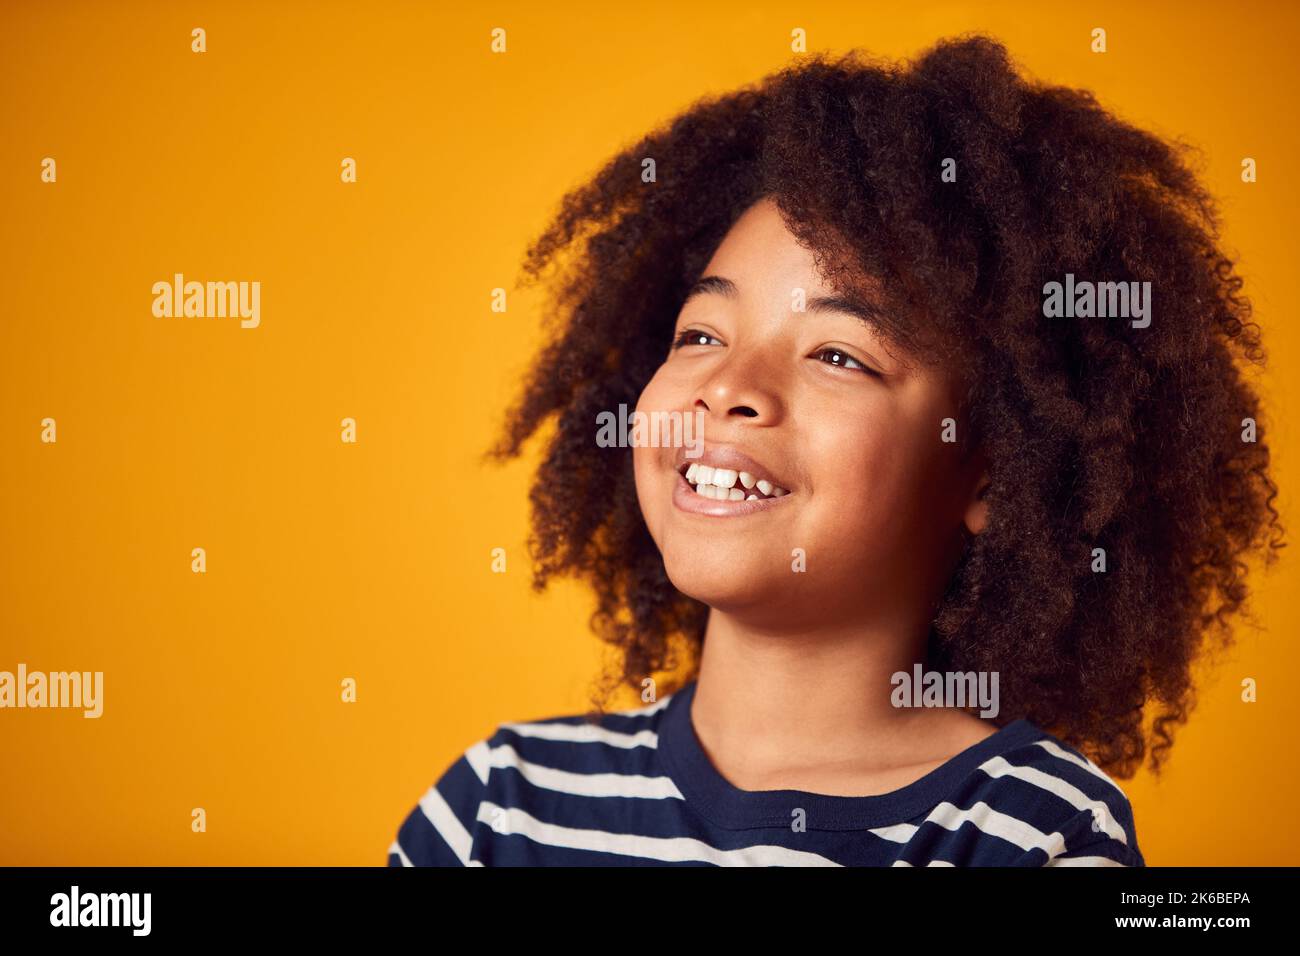 Studio Portrait Of Smiling Young Boy Shot Against Yellow Background Stock Photo